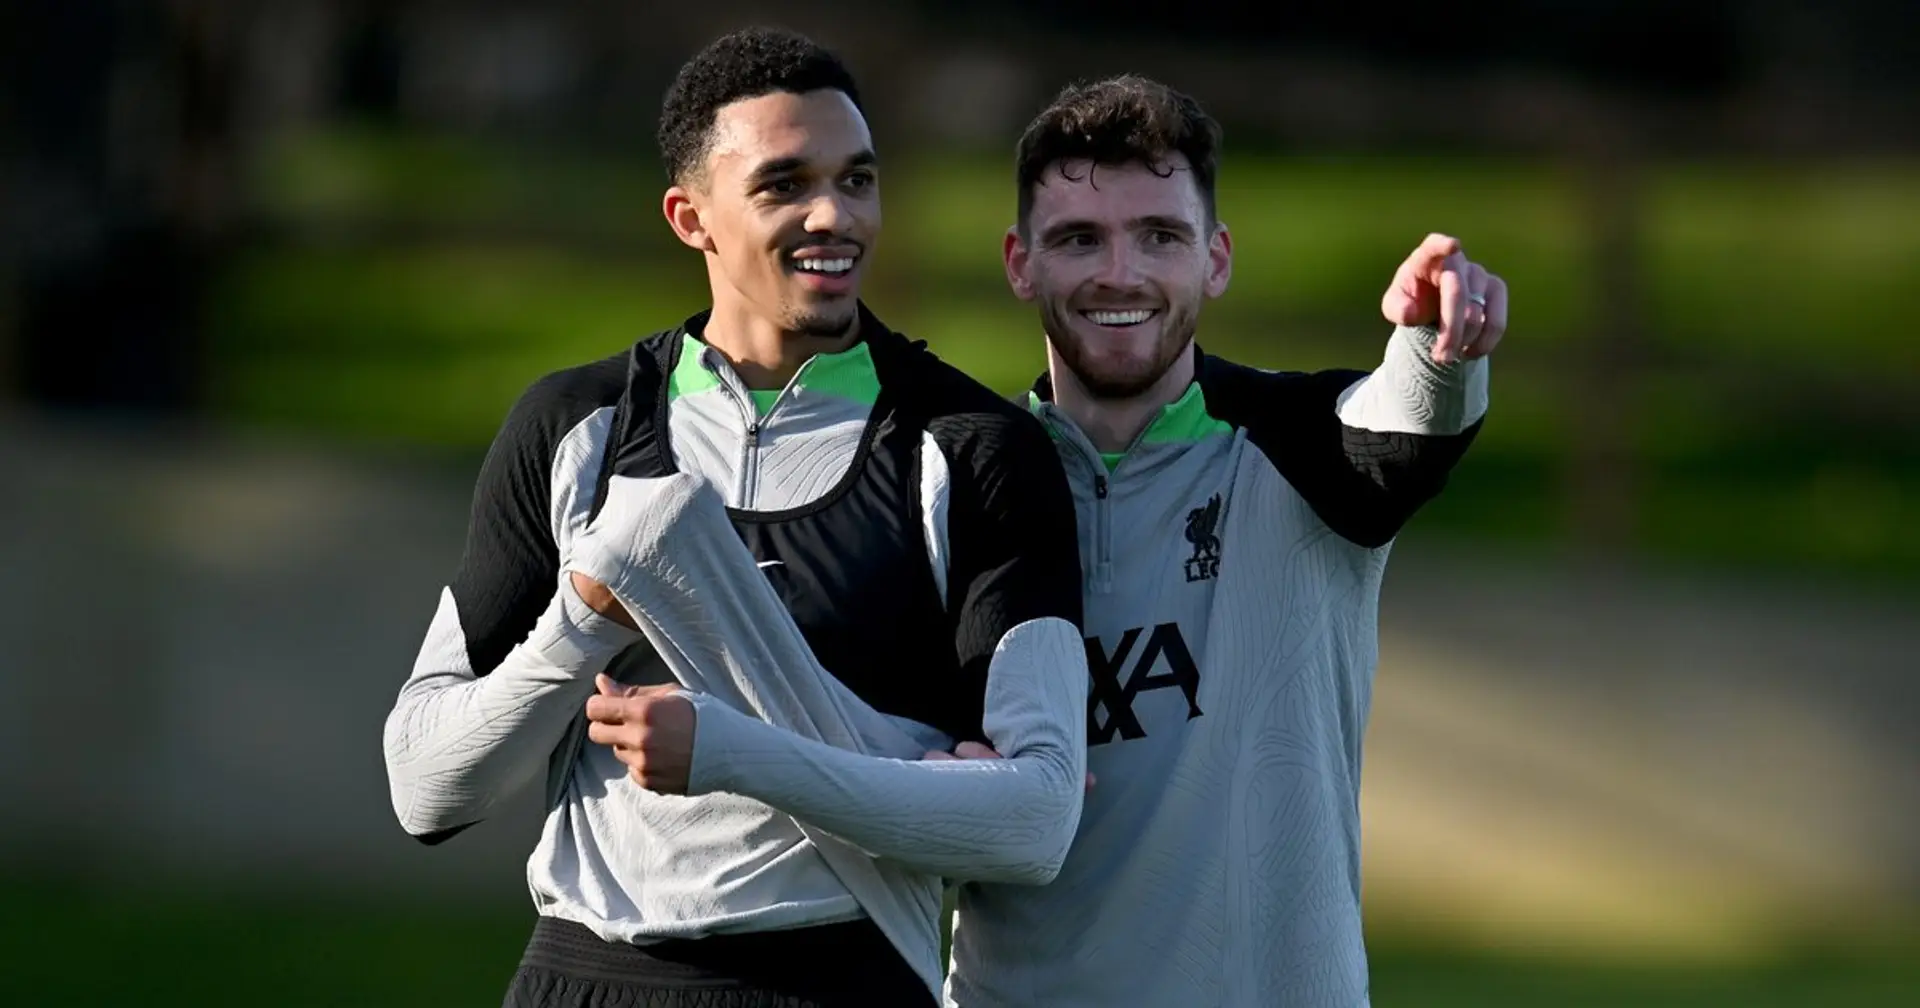 Andy Robertson overtakes Trent Alexander-Arnold for all-time Premier League assist record for defenders